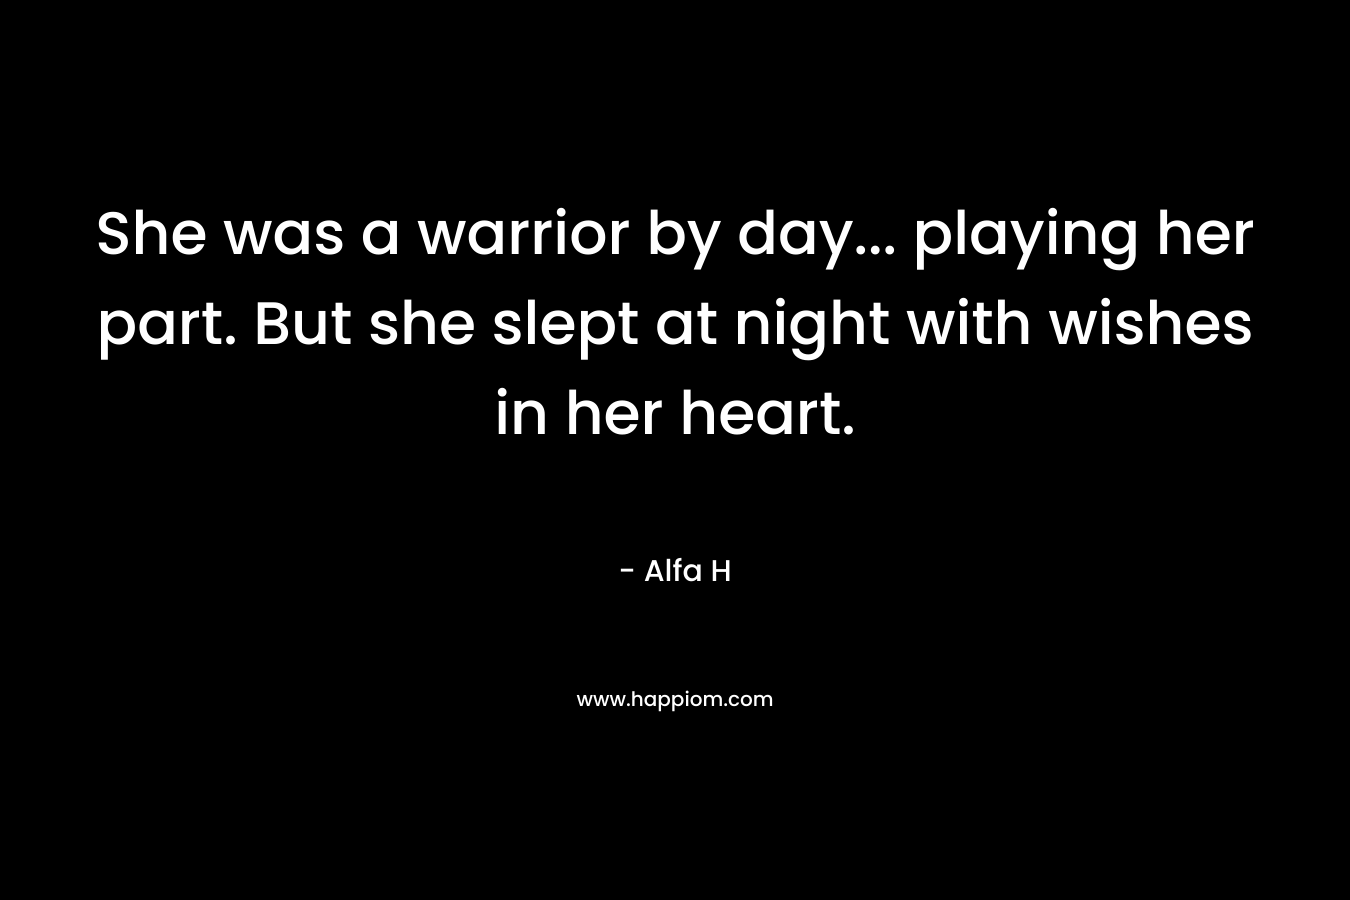 She was a warrior by day... playing her part. But she slept at night with wishes in her heart.